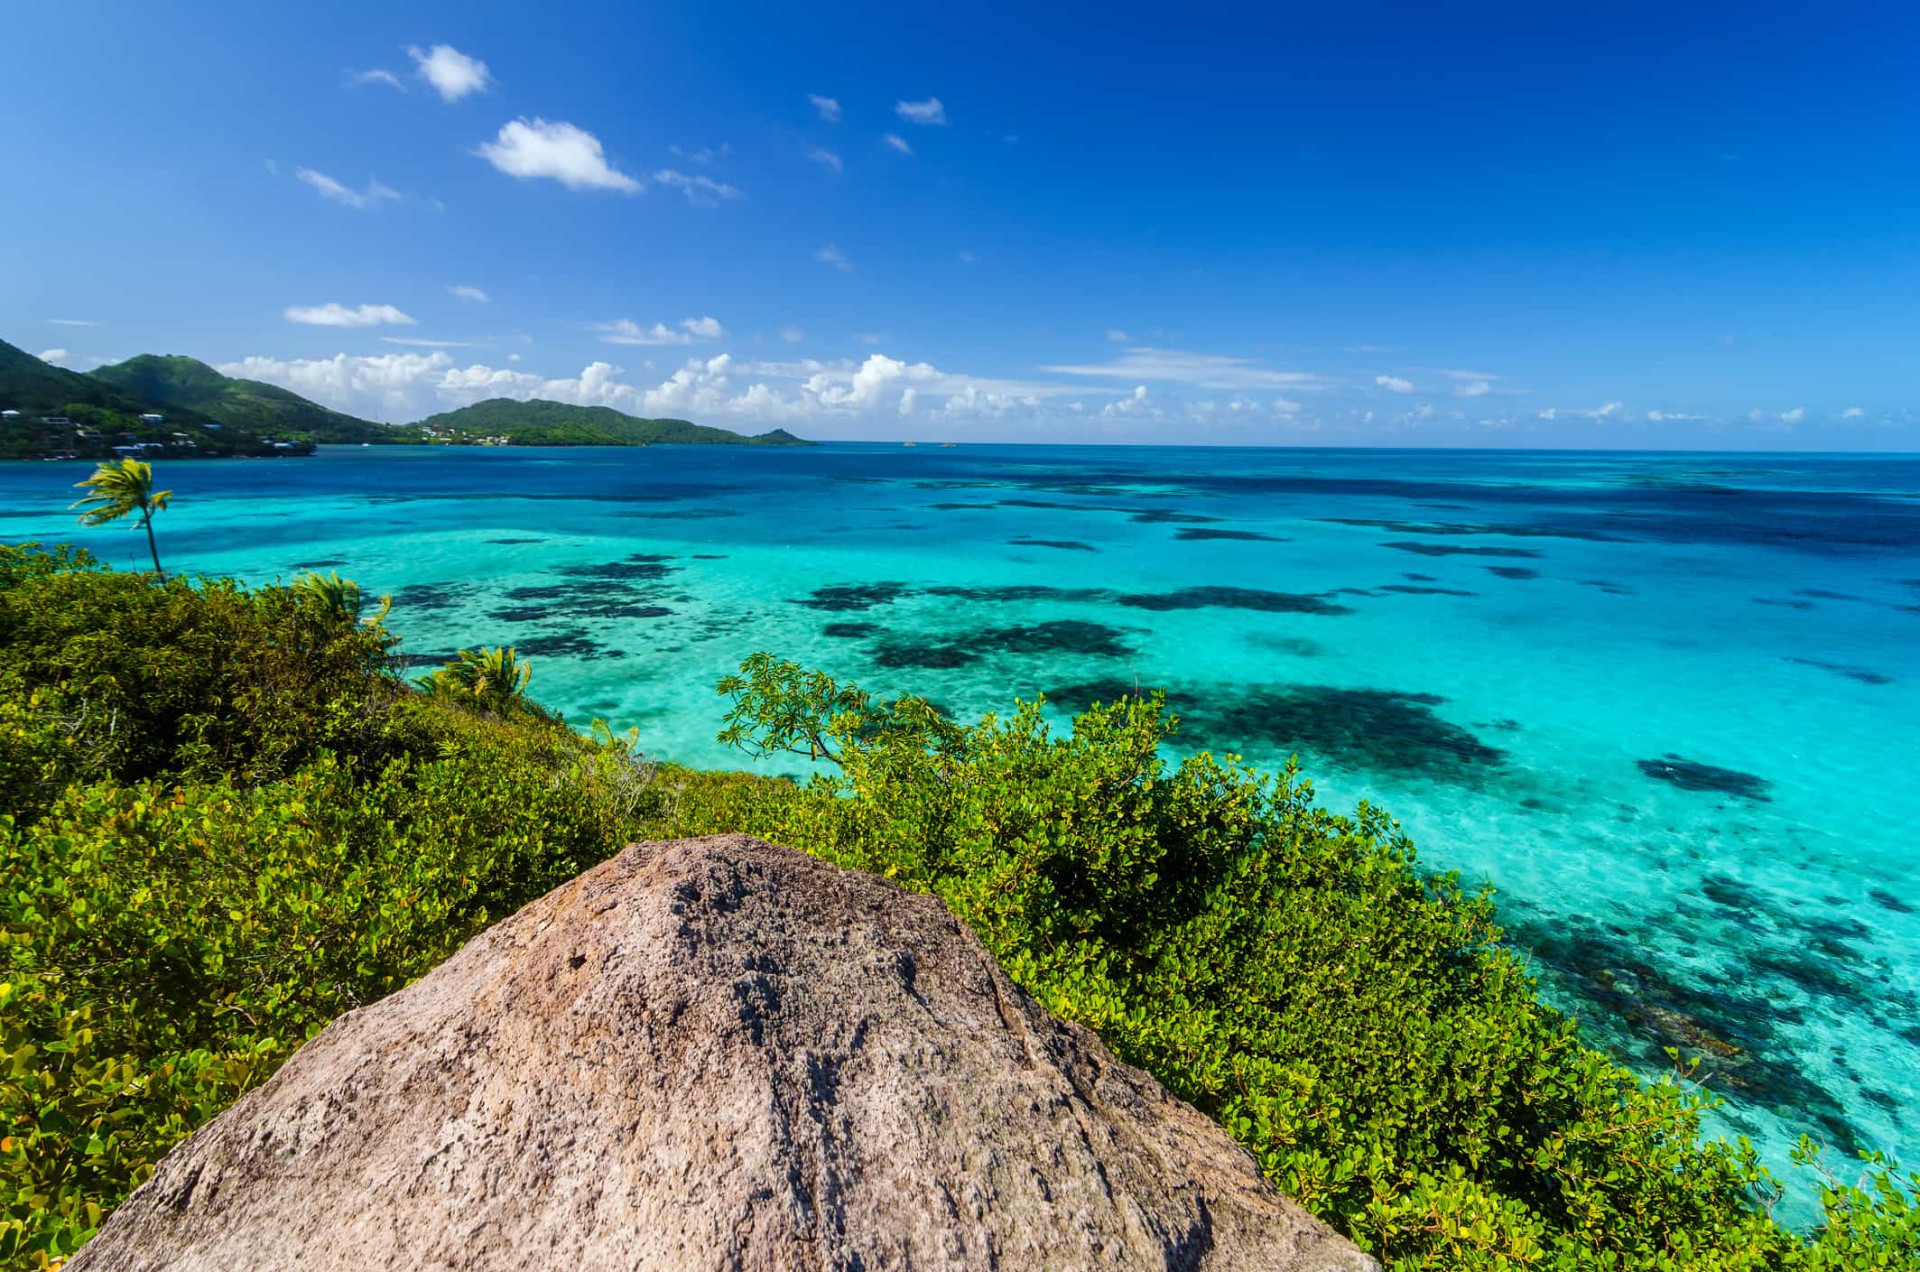 Isla de Providencia, also known as Old Providence, falls within a UNESCO Marine Protected Area, the Seaflower Biosphere Reserve. The island exudes a distinctly Caribbean flavor, and the inhabitants mostly speak an English-based creole language rather than Spanish.